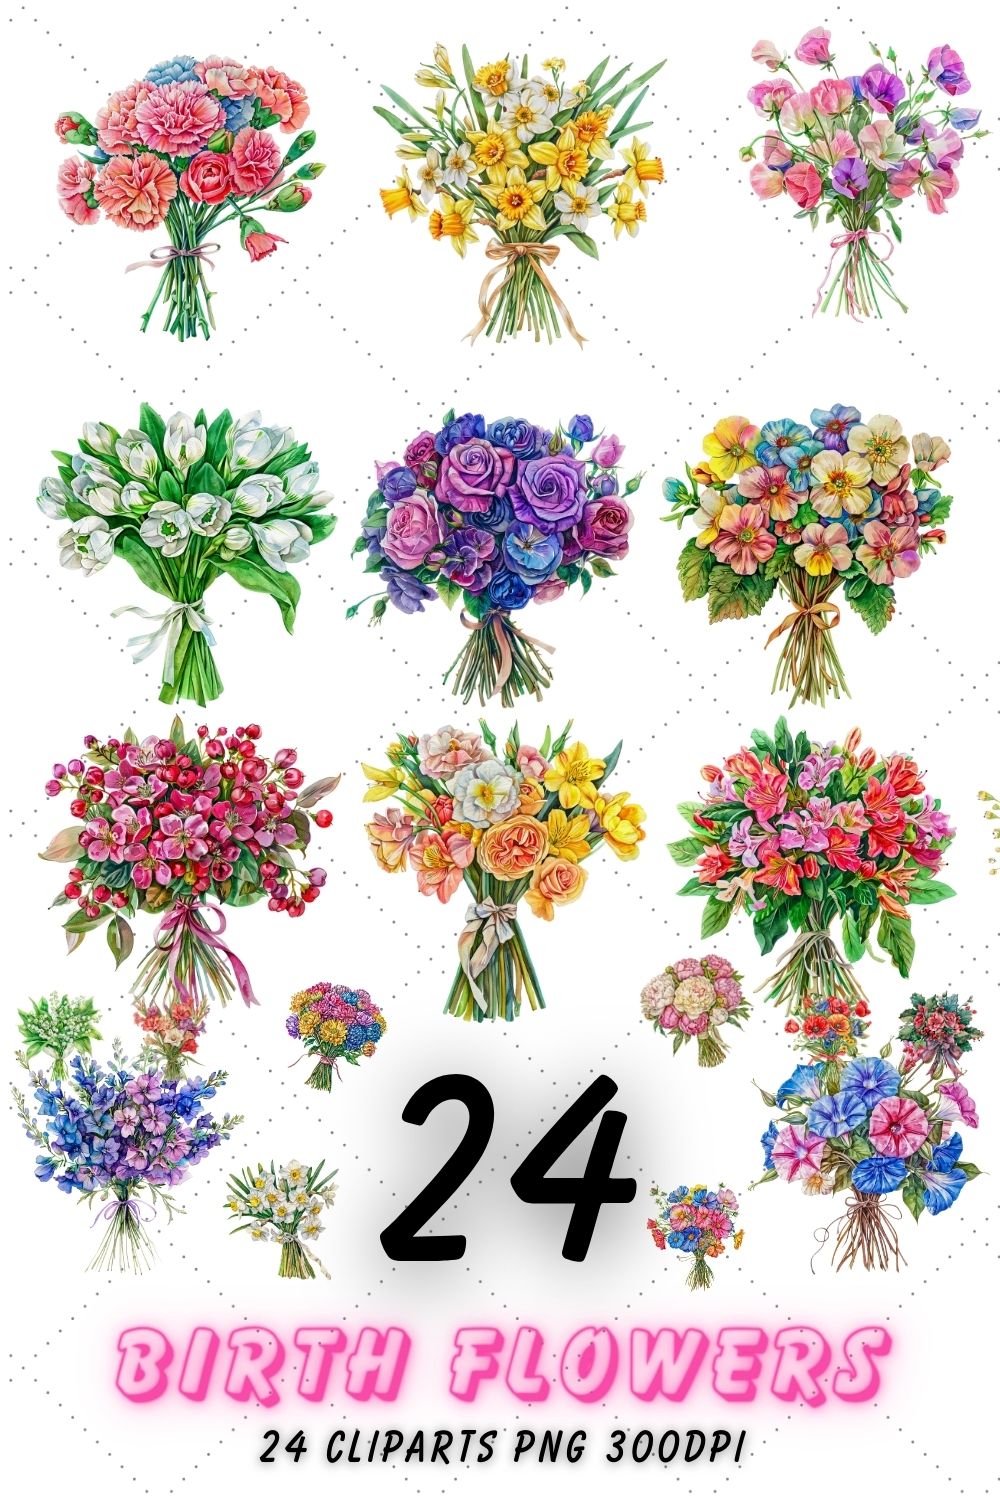 Birth Flower bouquet PNG Birth month Clipart Watercolor & Vintage style birth month flowers clipart illustration Birthday flower Print DIY pinterest preview image.